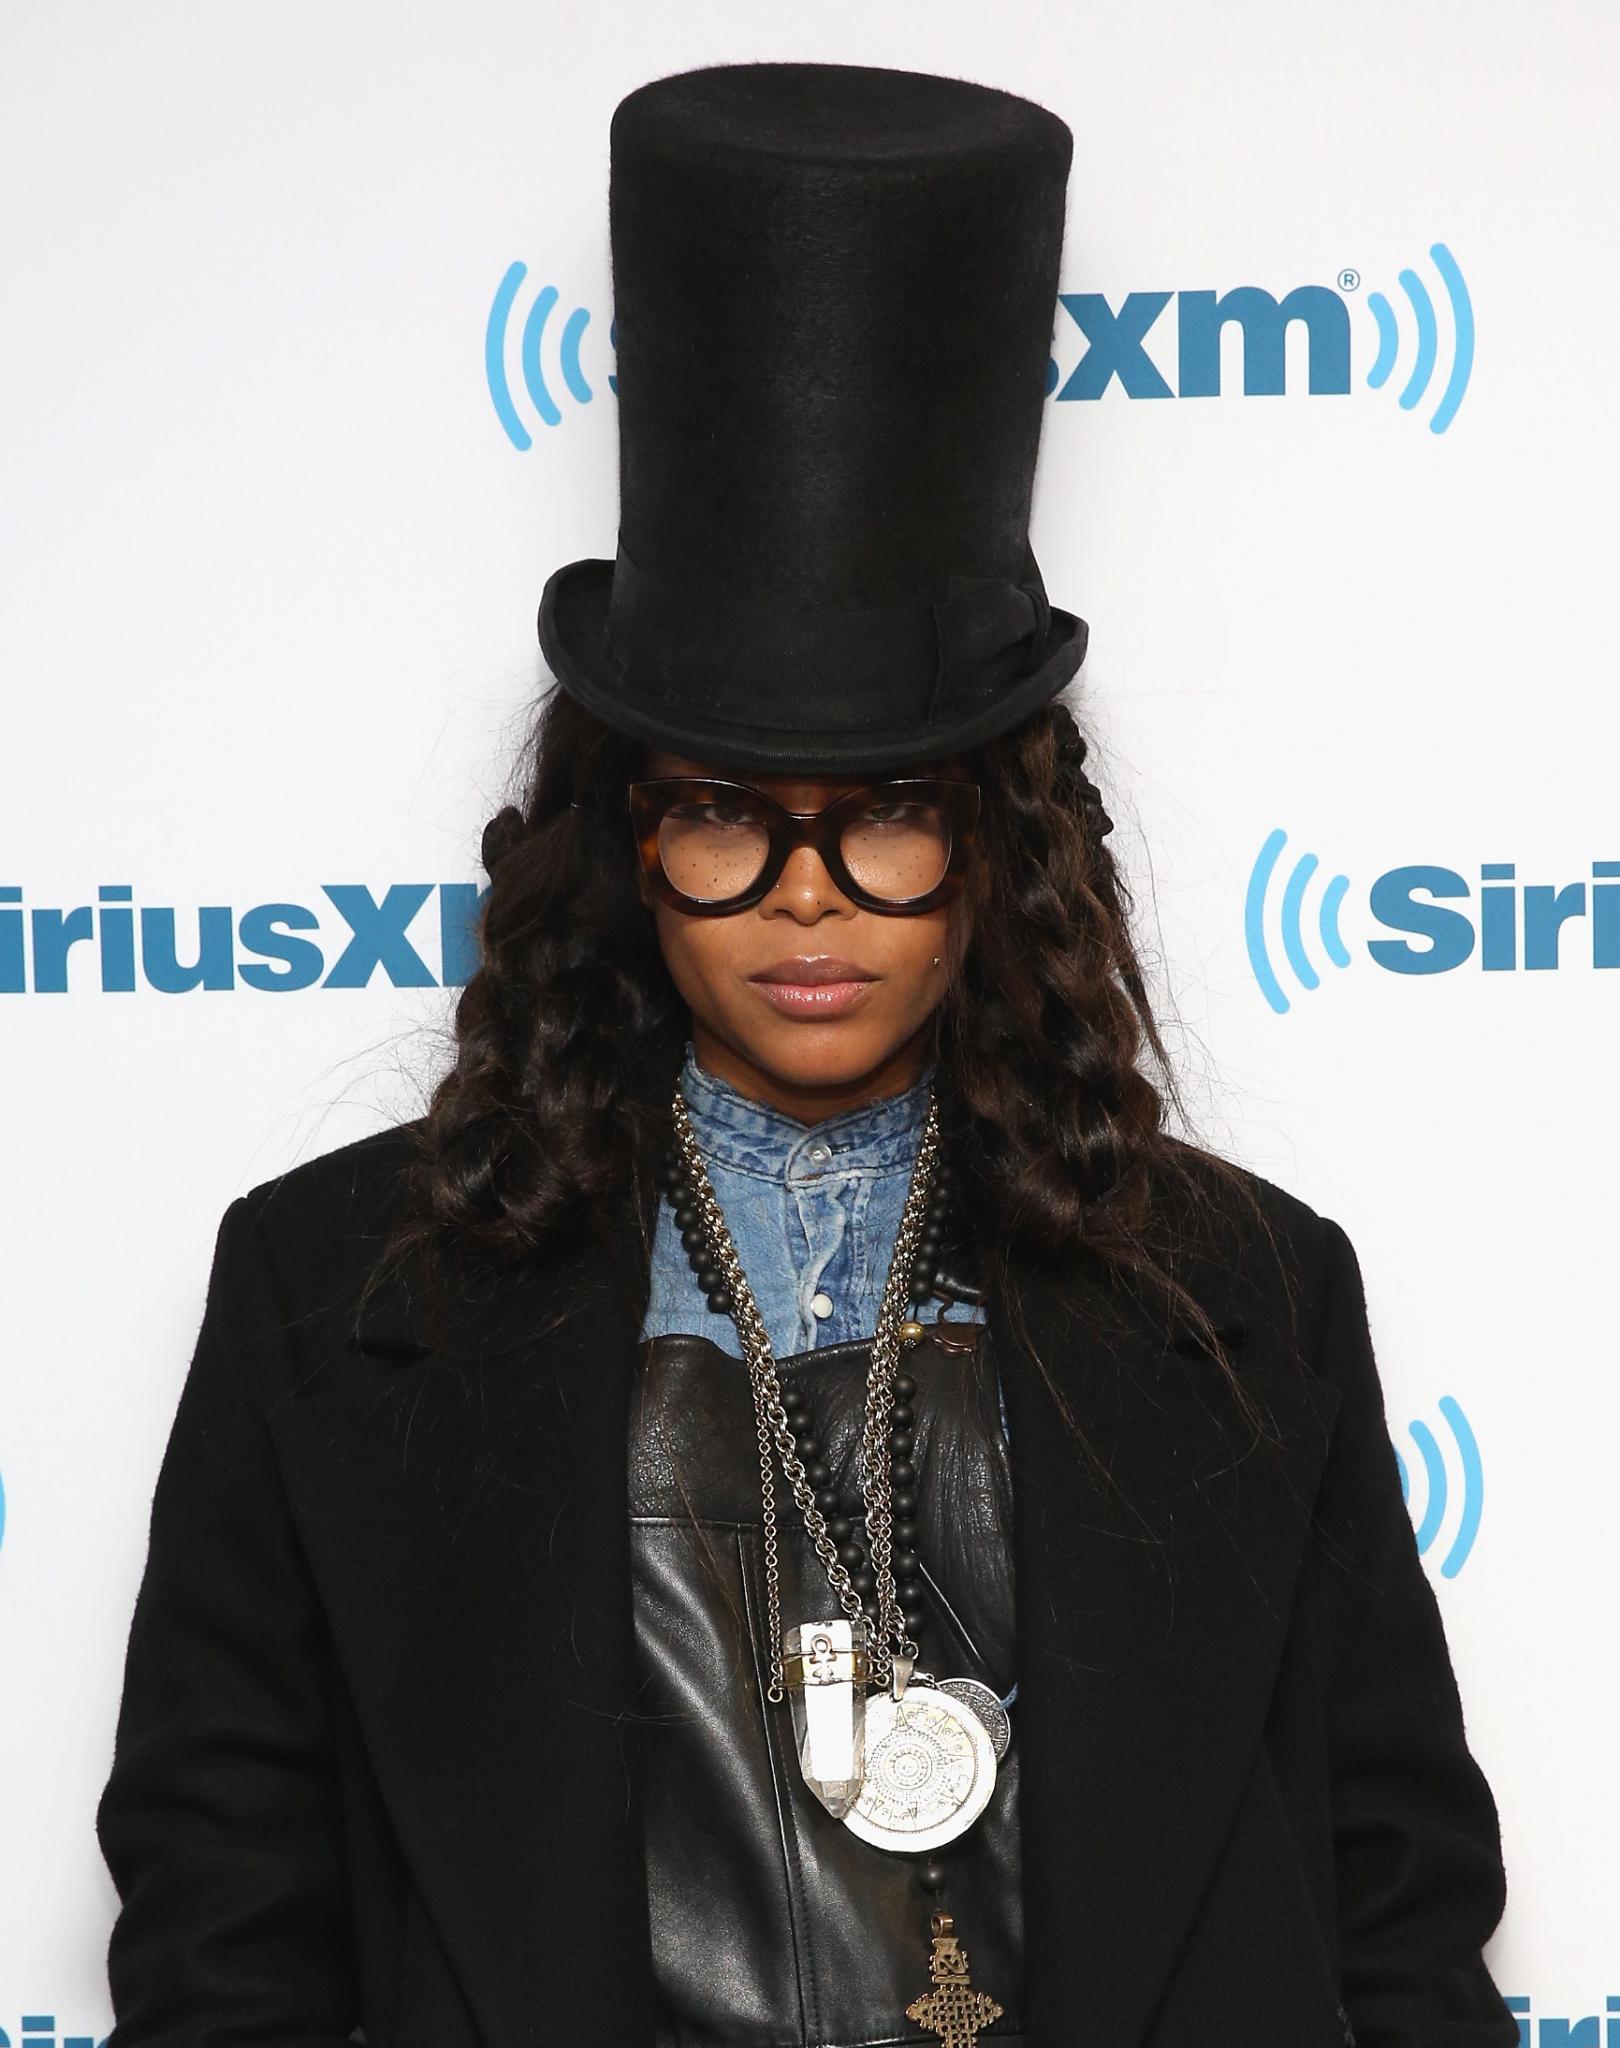 Just In Time For Holiday Chill: Erykah Badu's Mixtape Will Be Out This Friday